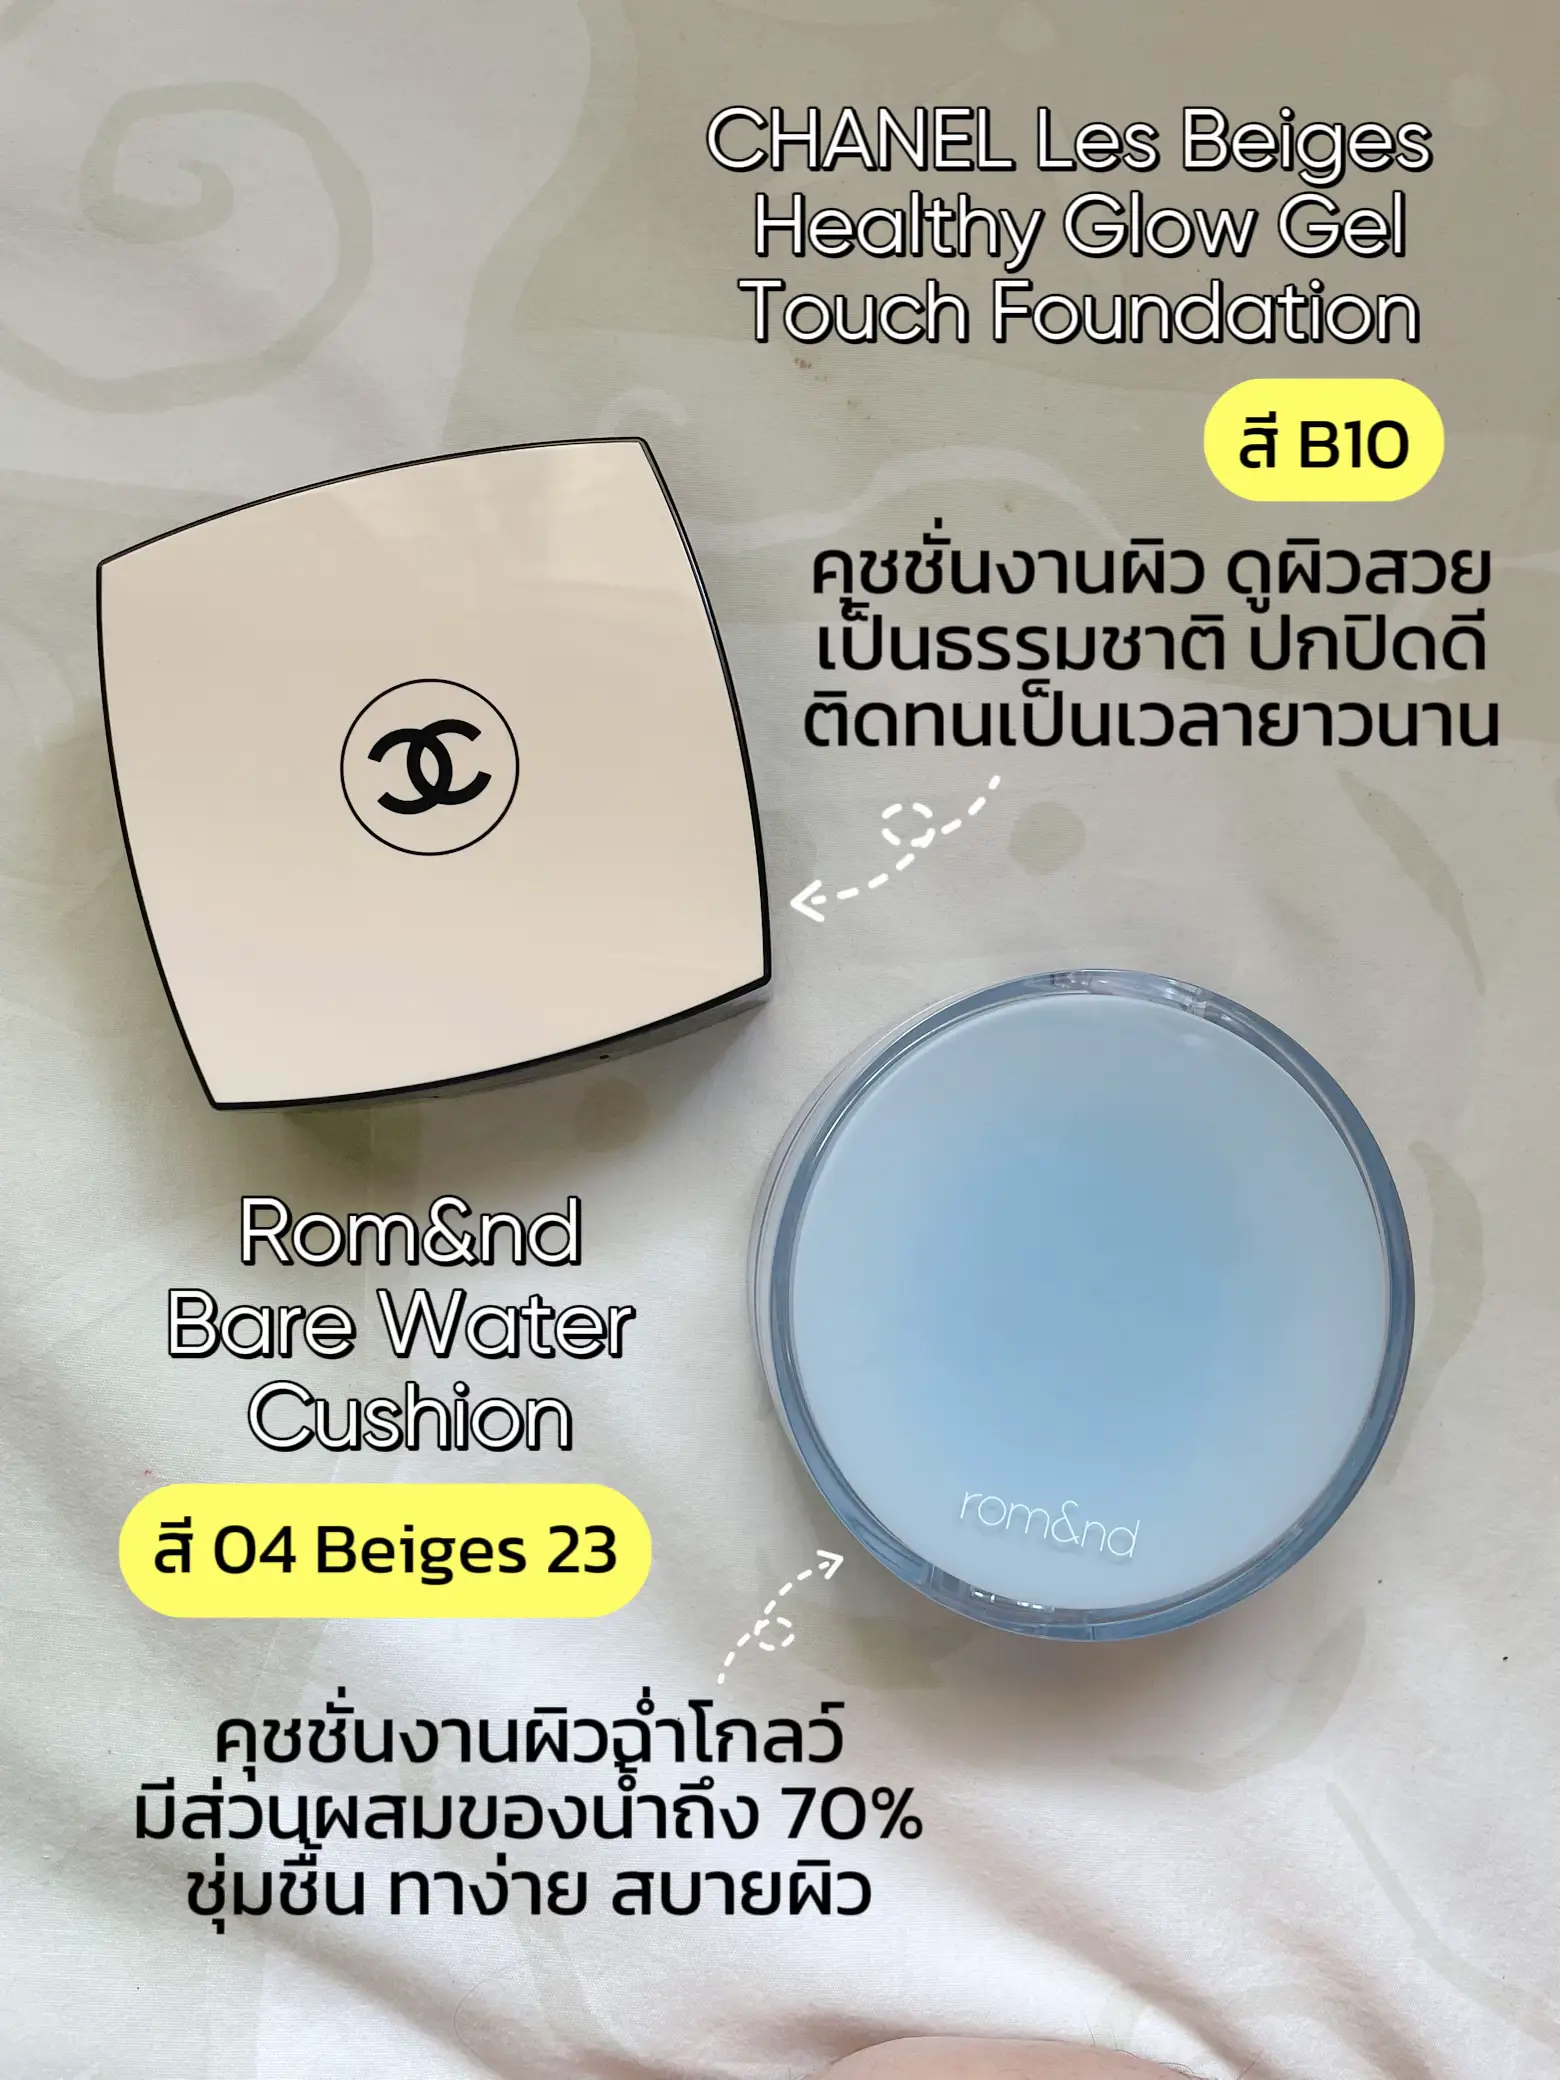 Compare the different CHANEL 🆚 Rom & nd skin mission